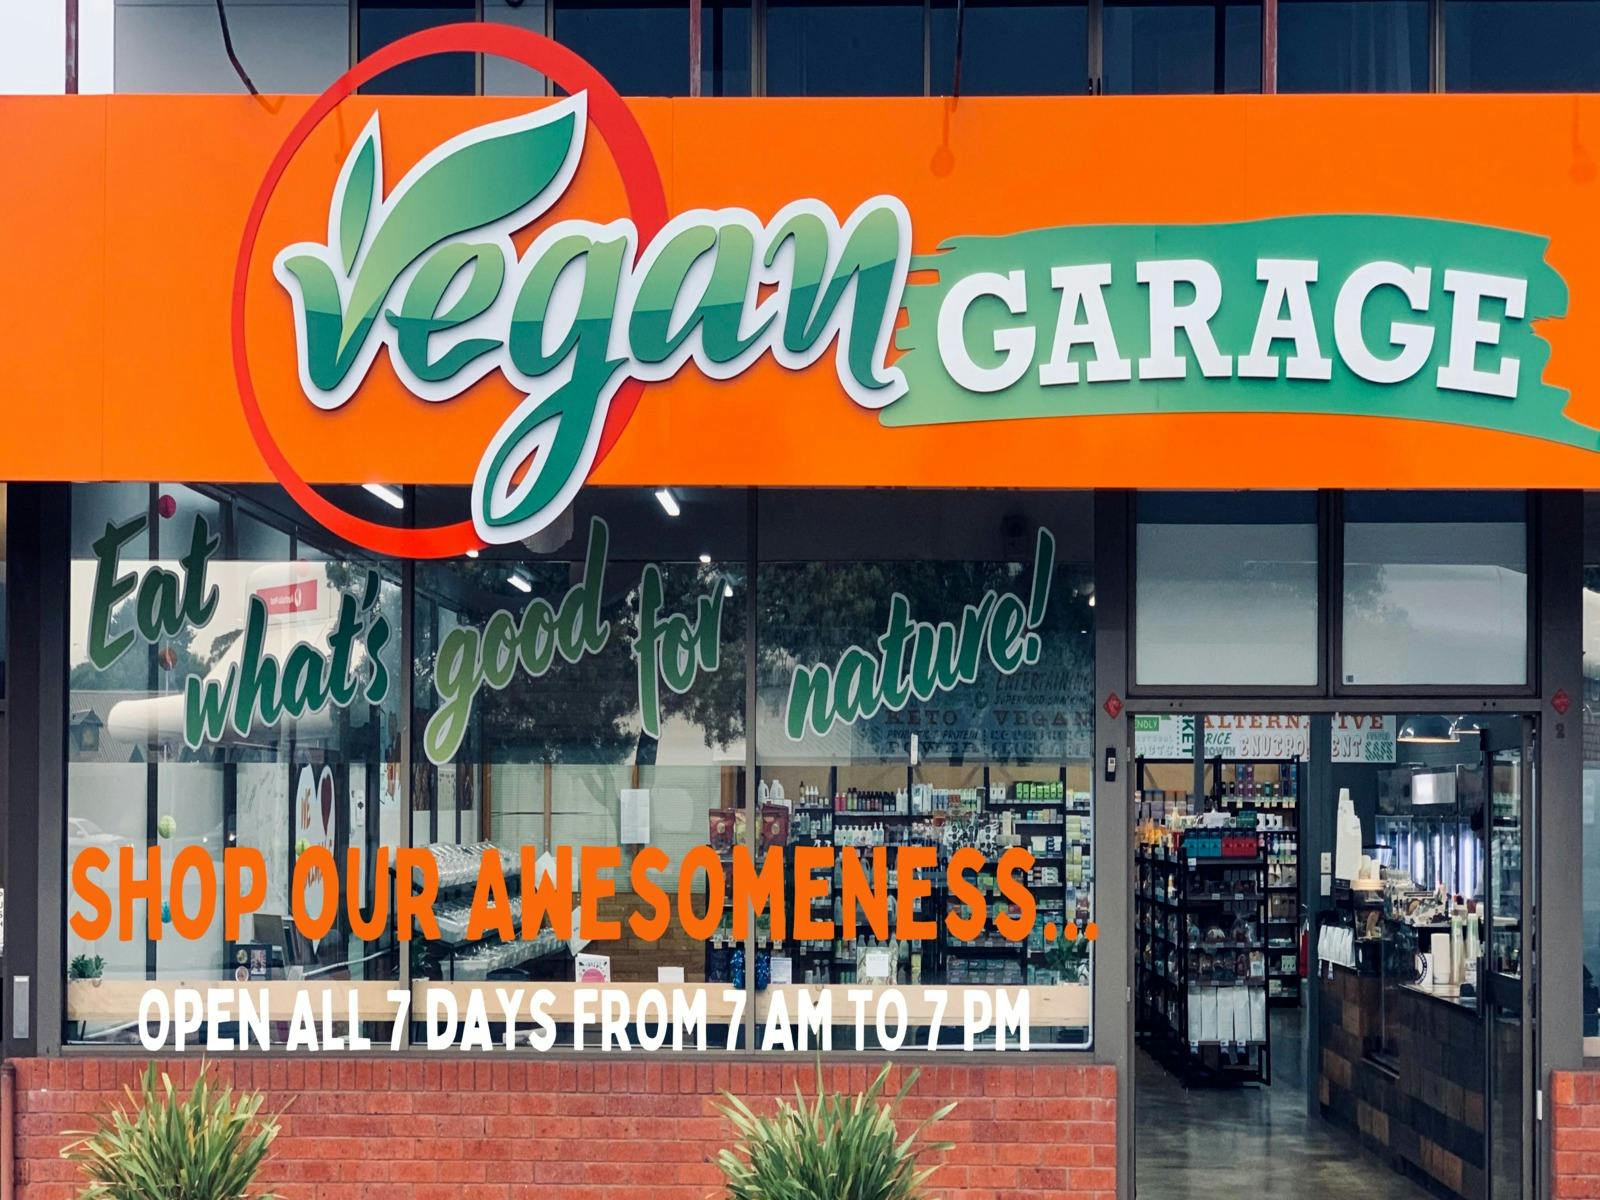 Vegan Garage-One stop grocery shop and cafe for your daily needs of vegan and gluten free produce